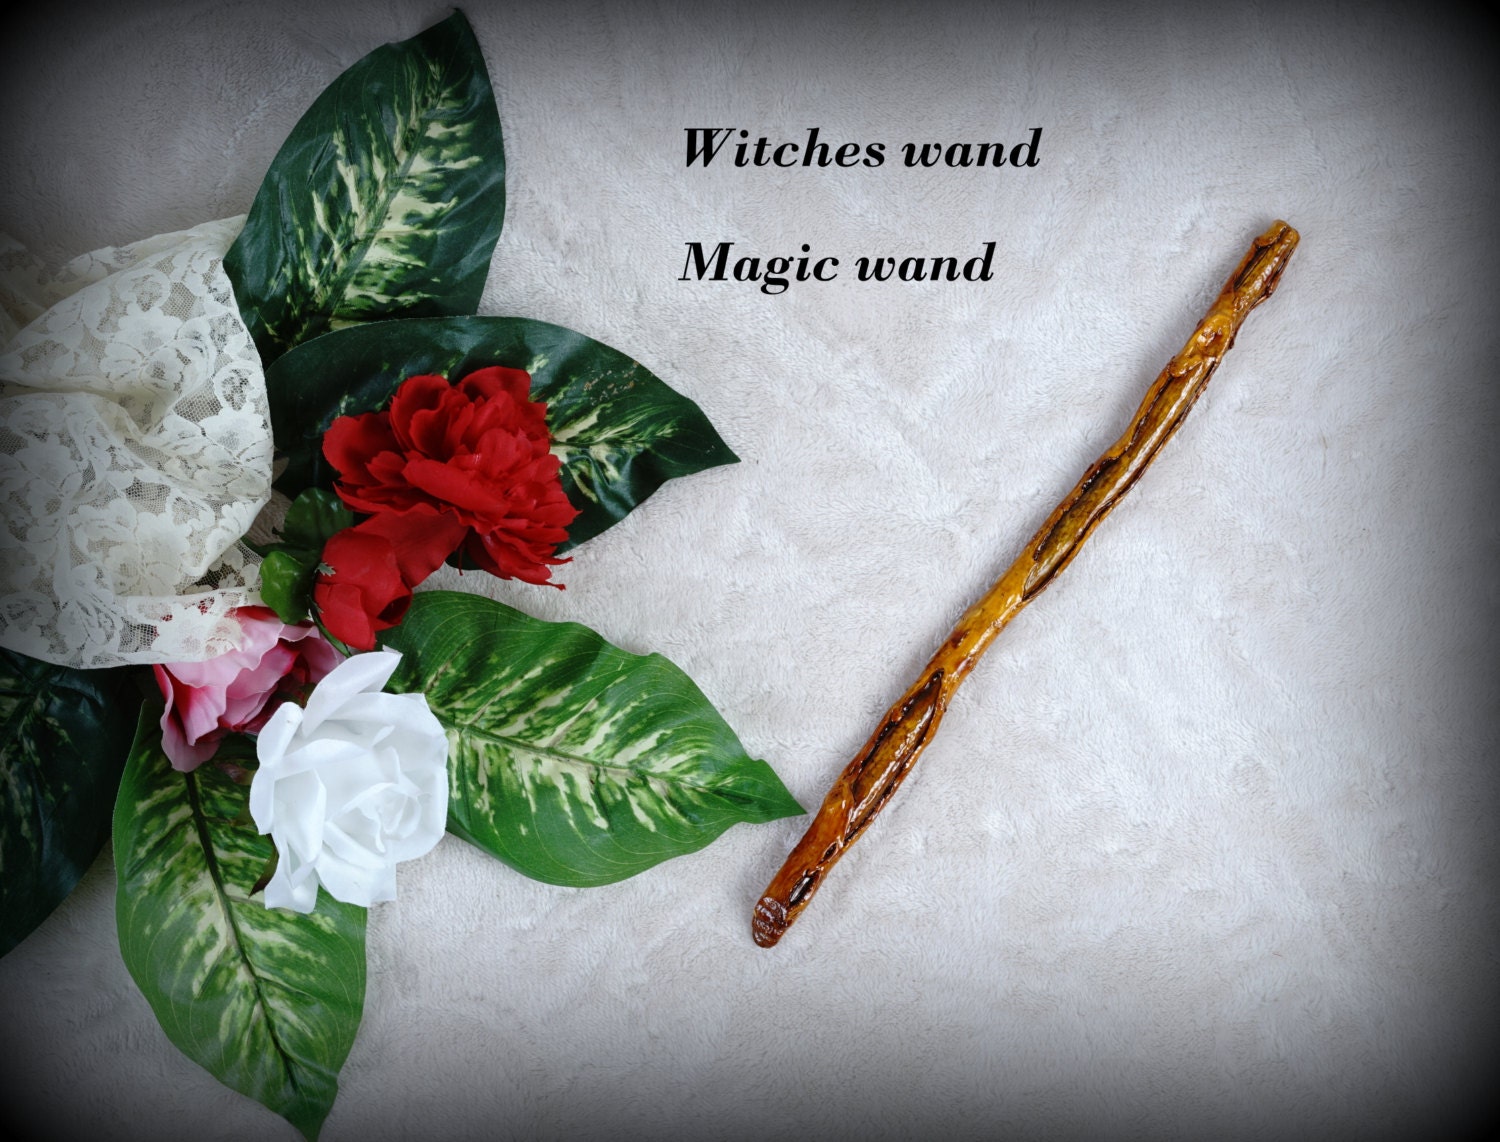 wands and witches missing harry